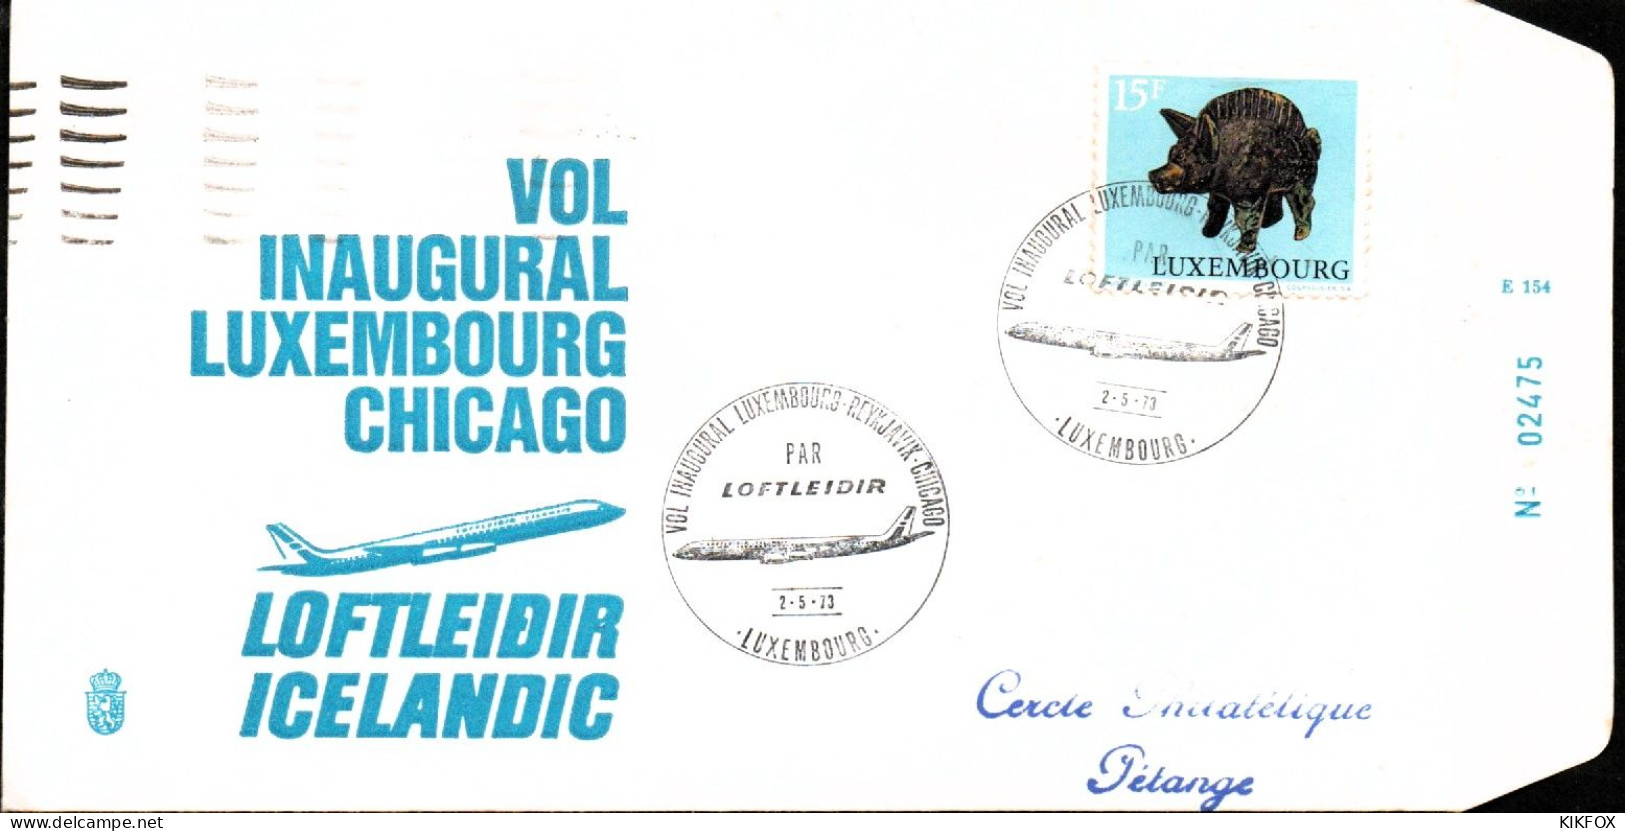 Luxembourg , Luxemburg , 2 - 5 - 1973 ,FDC Vol Inaugural Luxembourg-Chicago,  Timbre Mi 861 GESTEMPELT - Covers & Documents